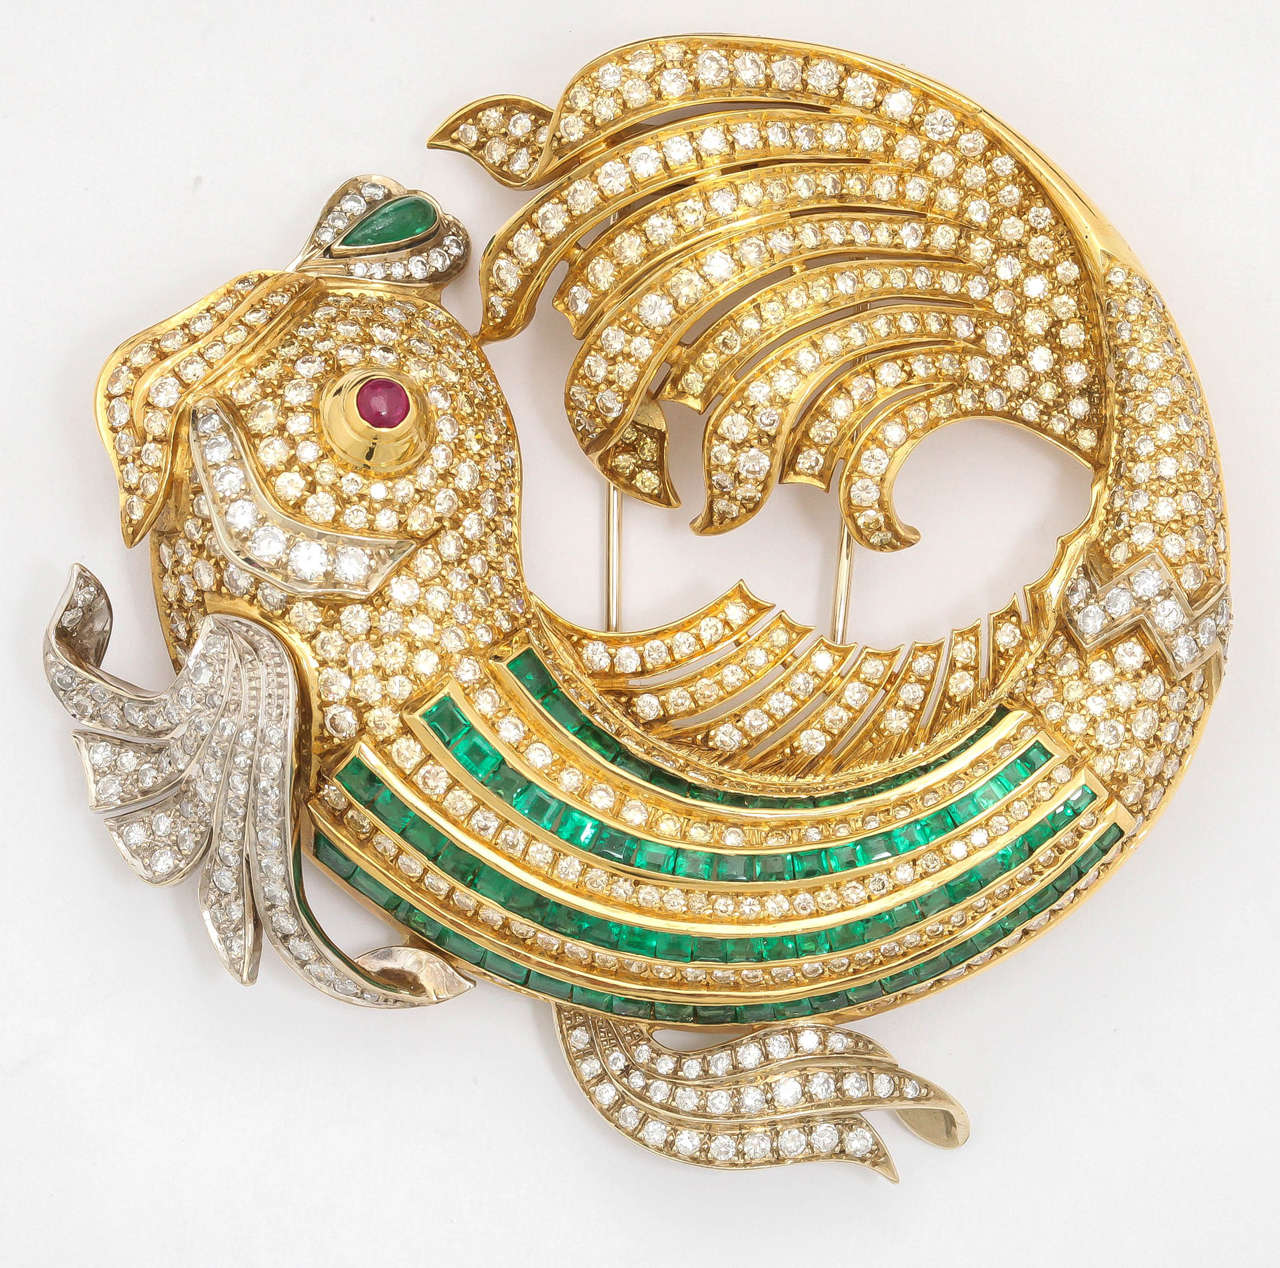 The fish is pave-set throughout with brilliant-cut diamonds, step-cut emerald and decorated with a cabochon ruby eye.